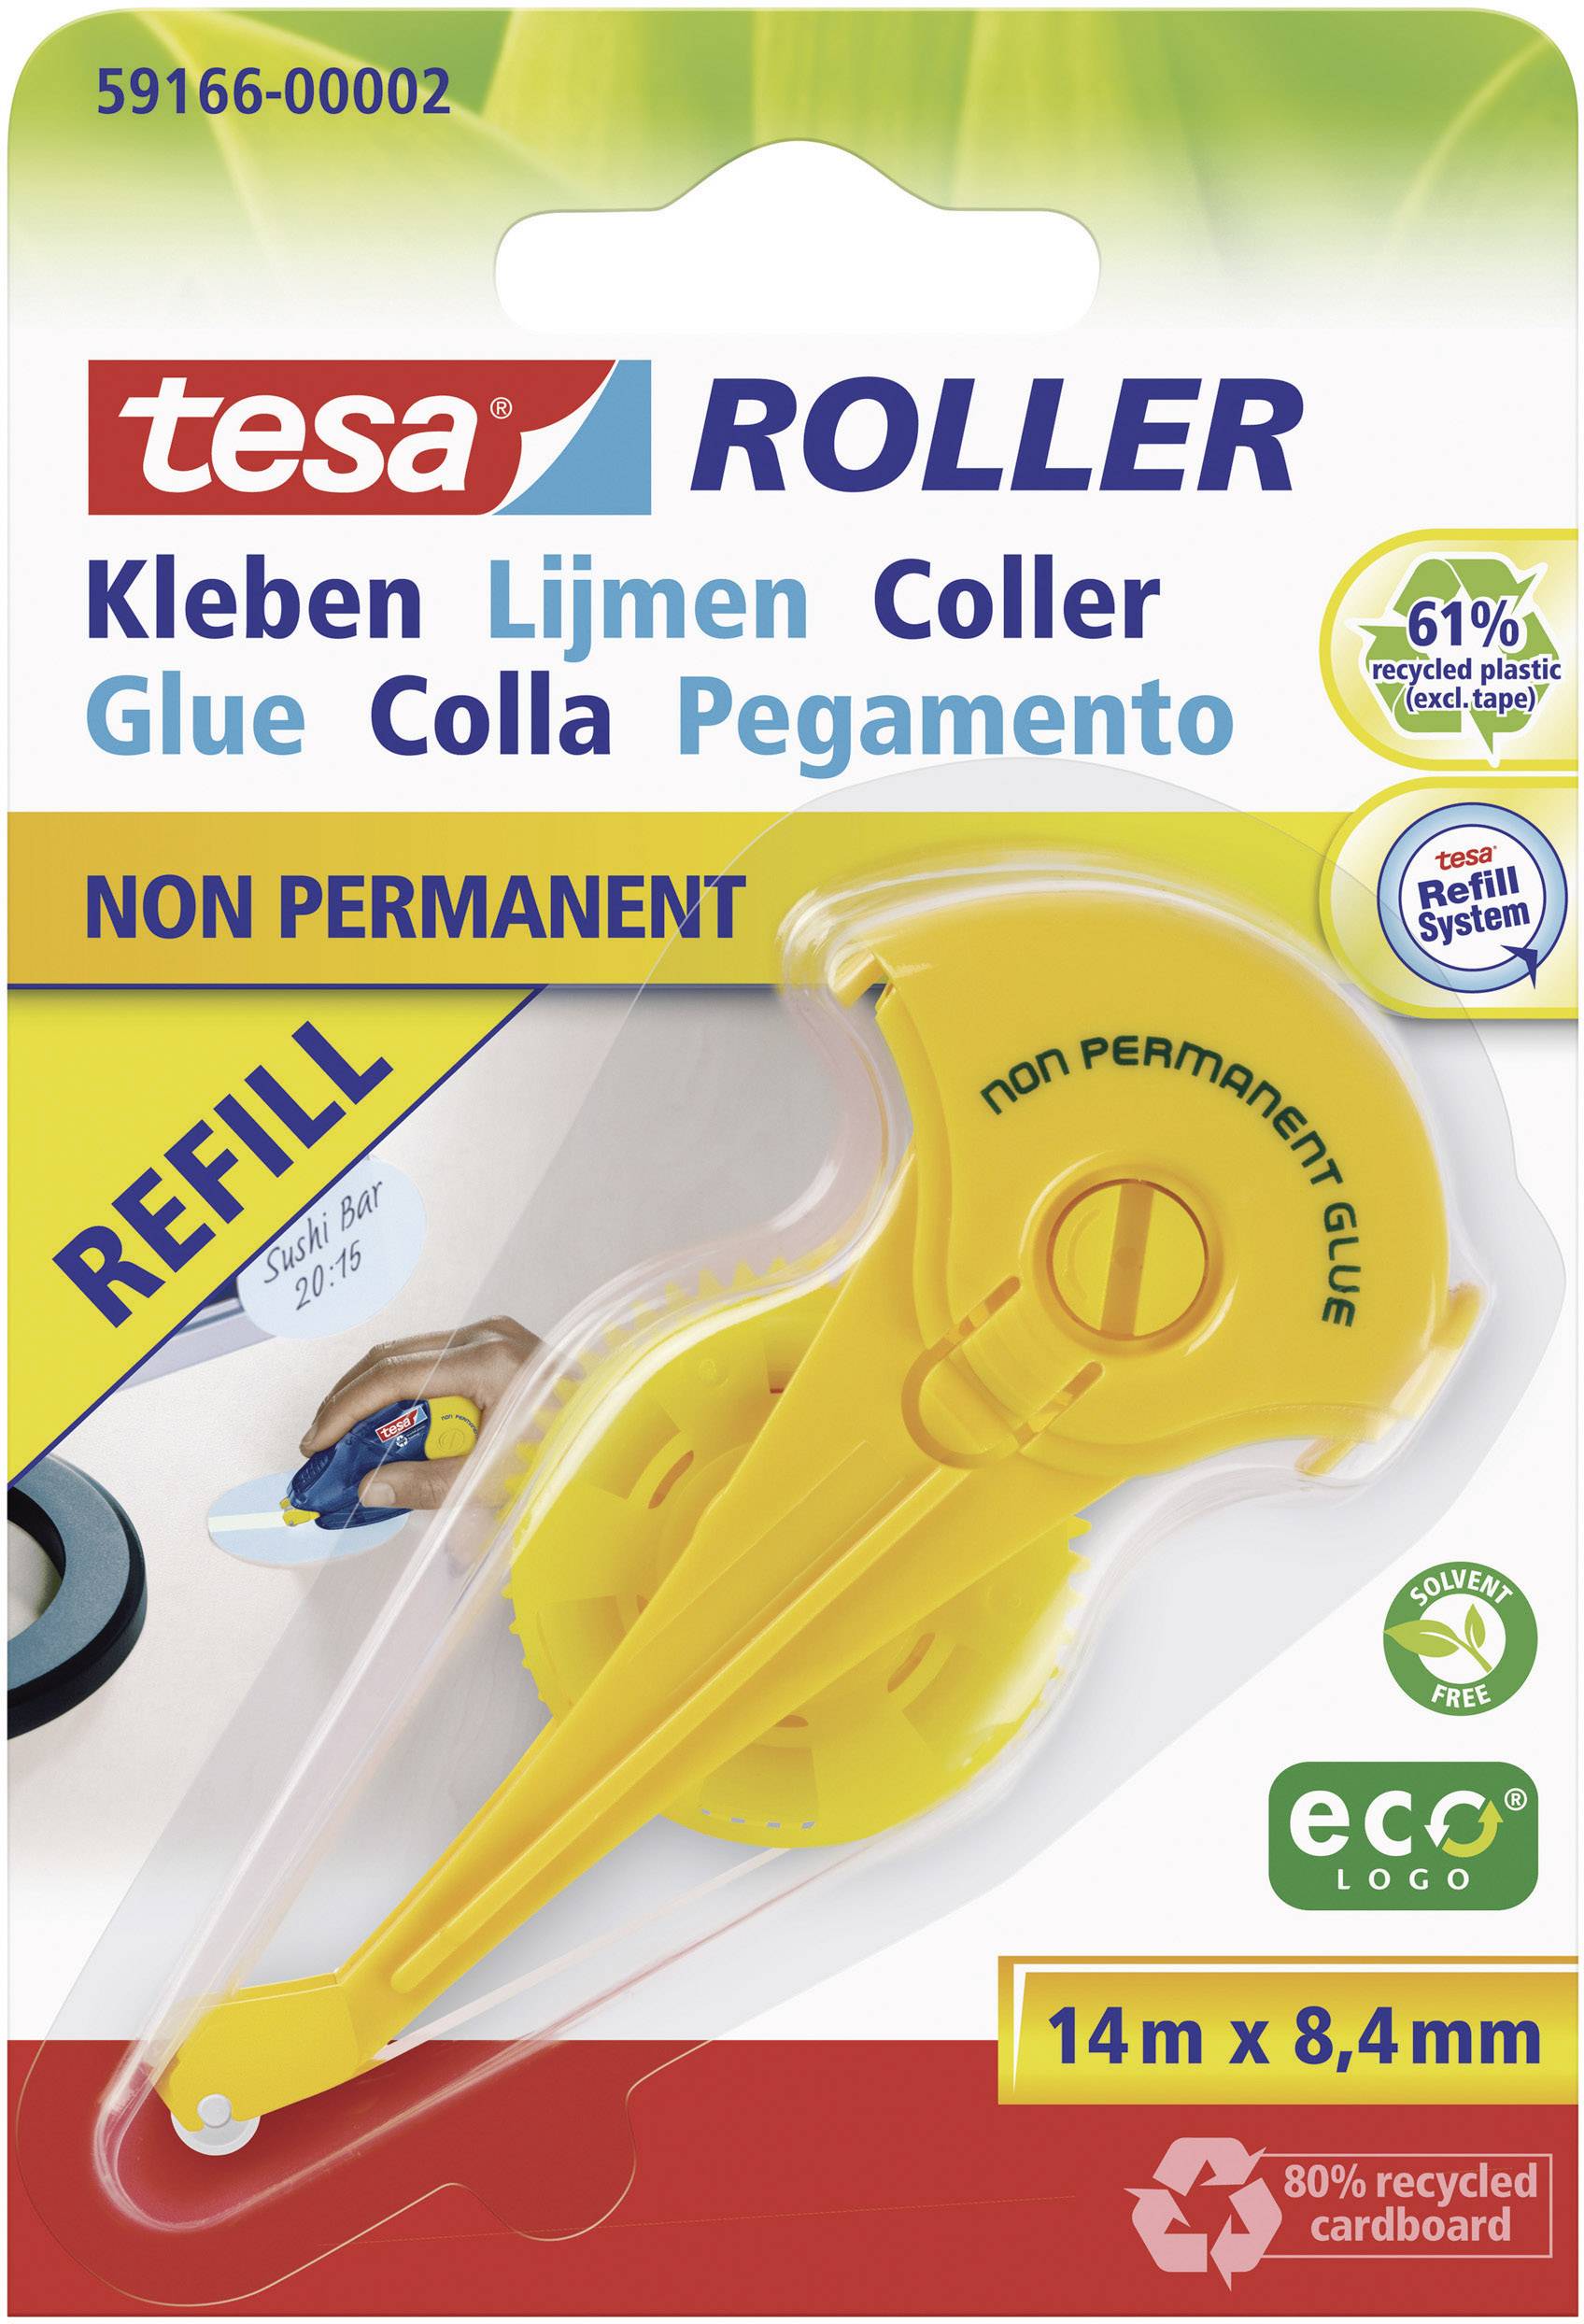 Tesa cylindre/rouleau encollage non permanent Ecologo recharge